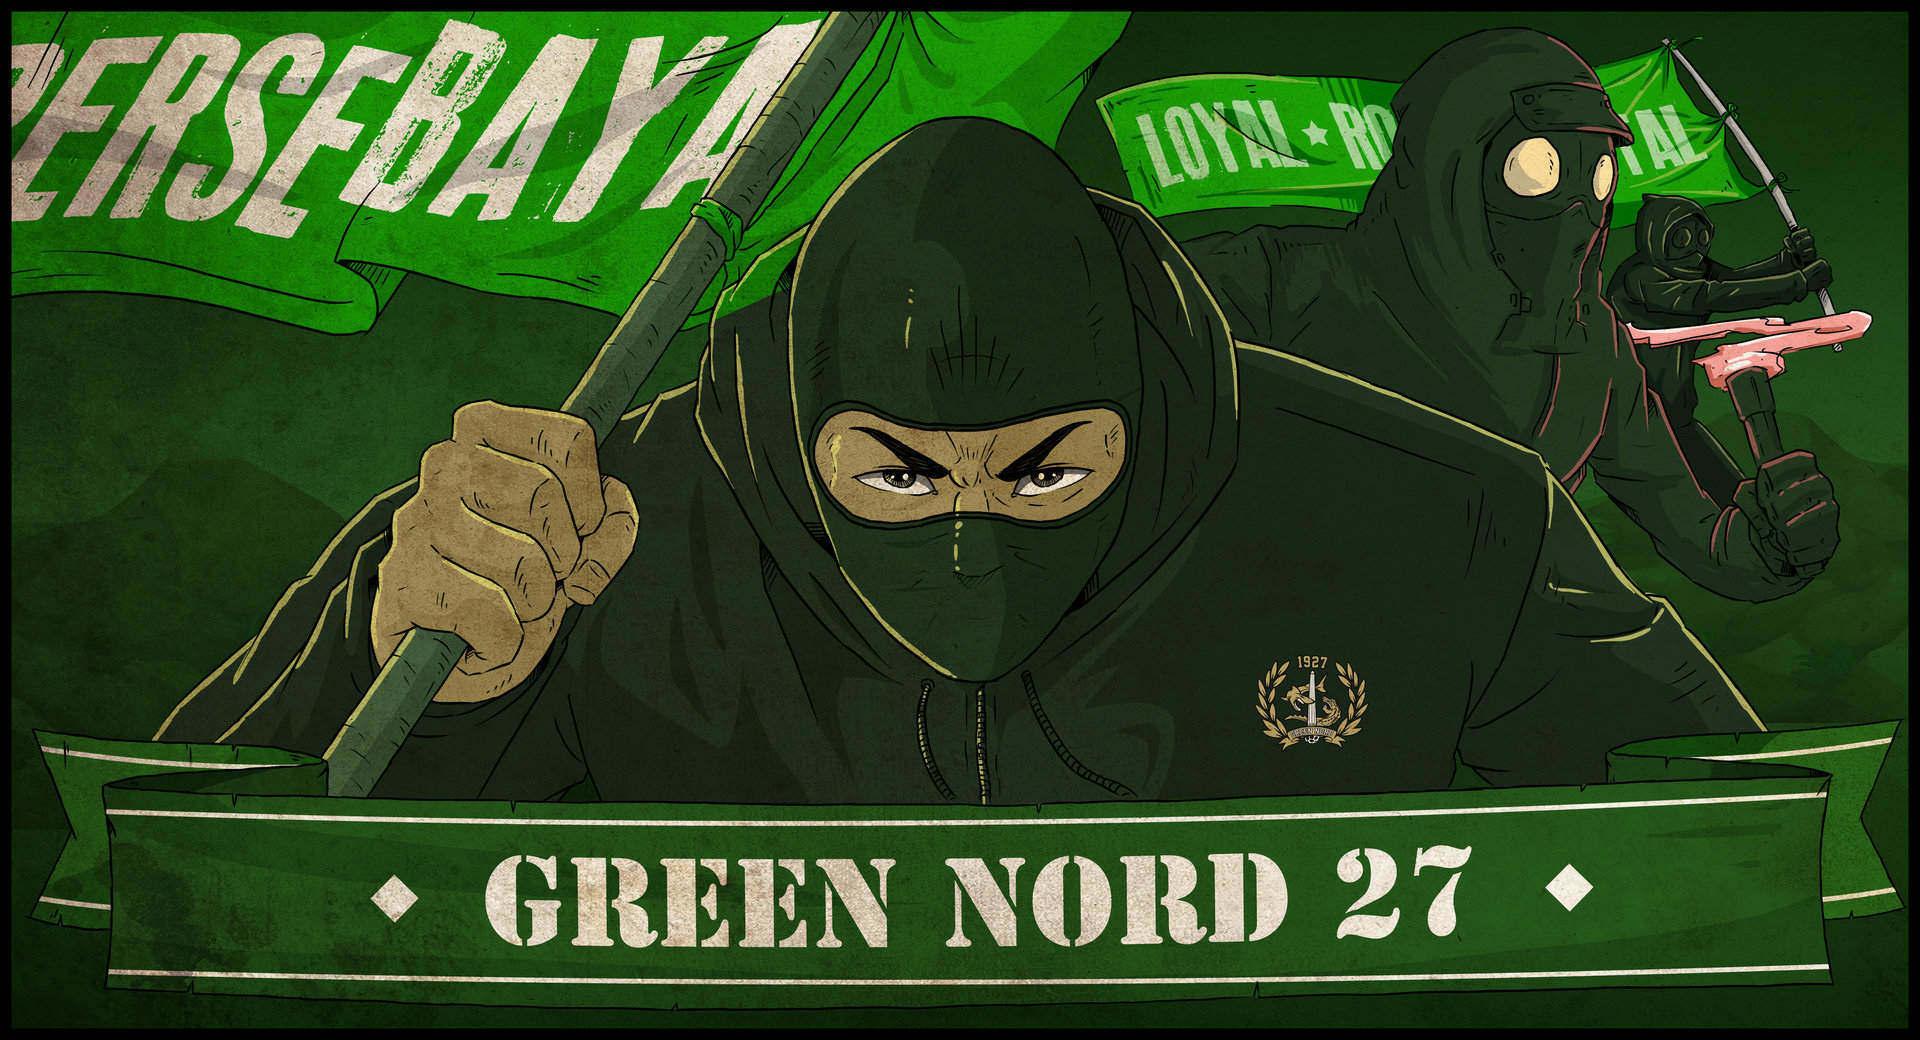 Welcome to Green Nord